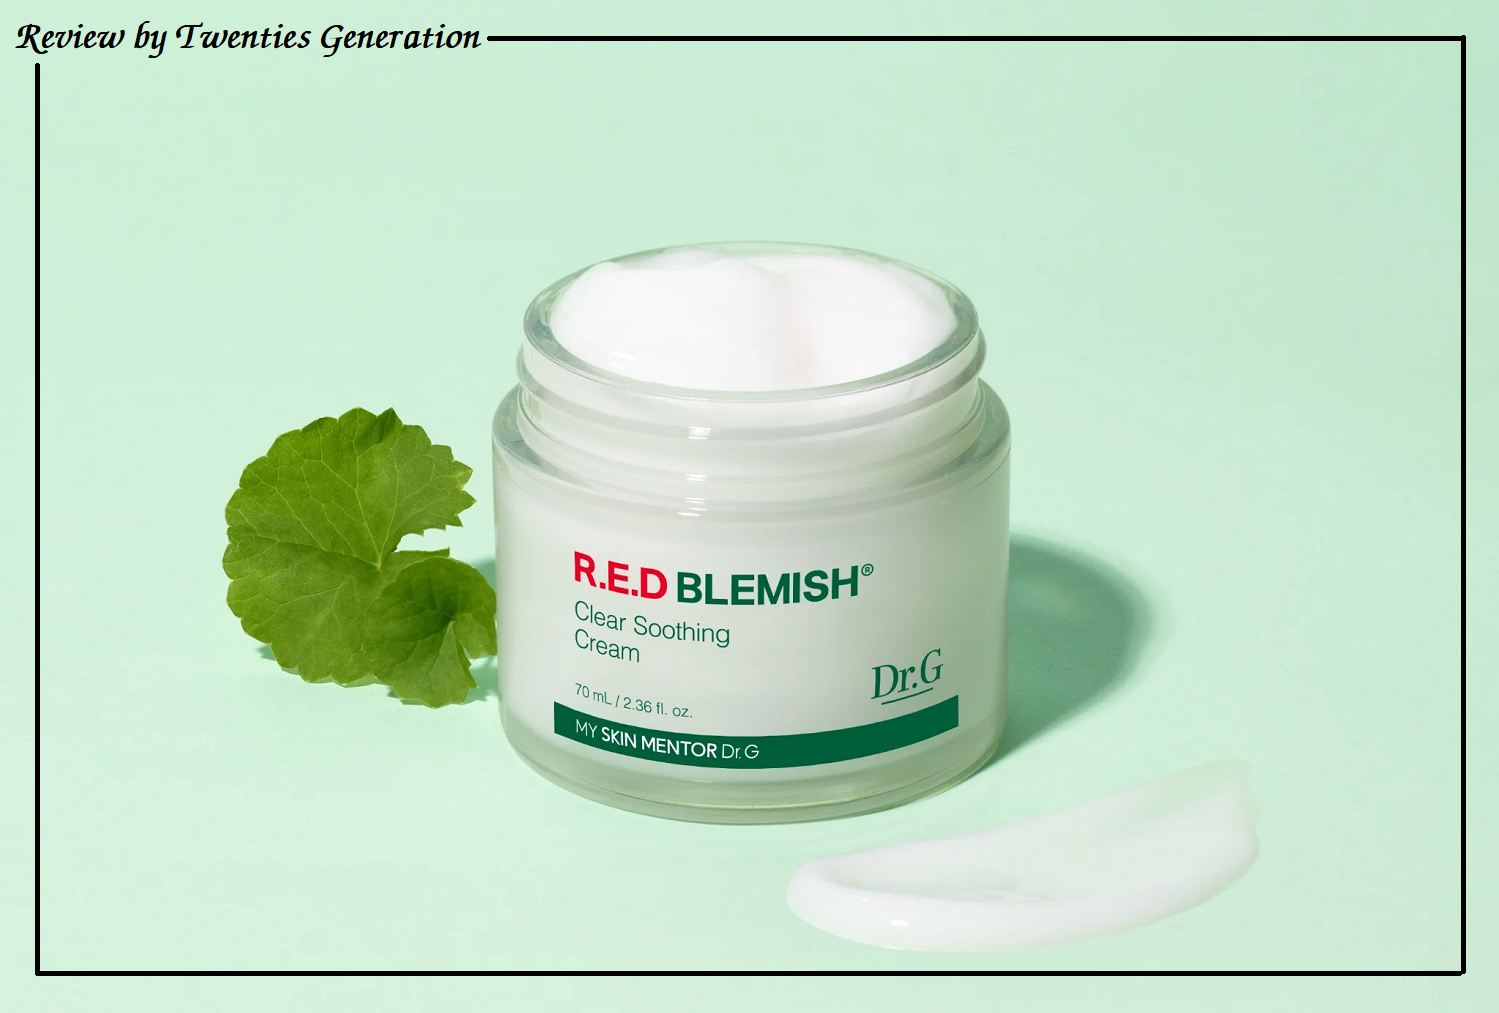 REVIEW THÀNH PHẦN DR.G R.E.D BLEMISH CLEAR SOOTHING CREAM